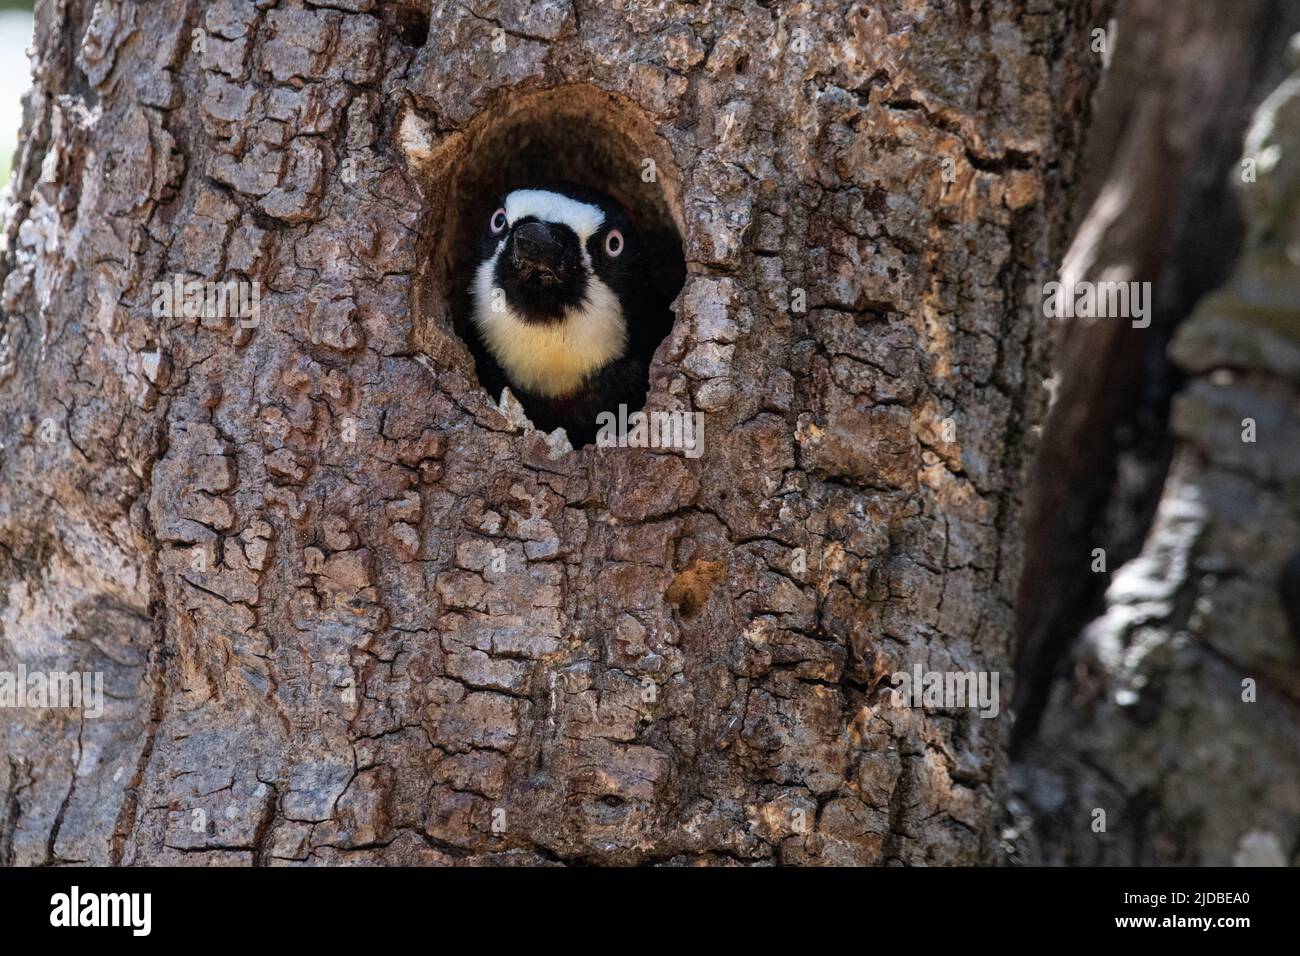 An acorn woodpecker (Melanerpes formicivorus) looking out of the tree hole where it is nesting in Sonoma county, California, USA. Stock Photo